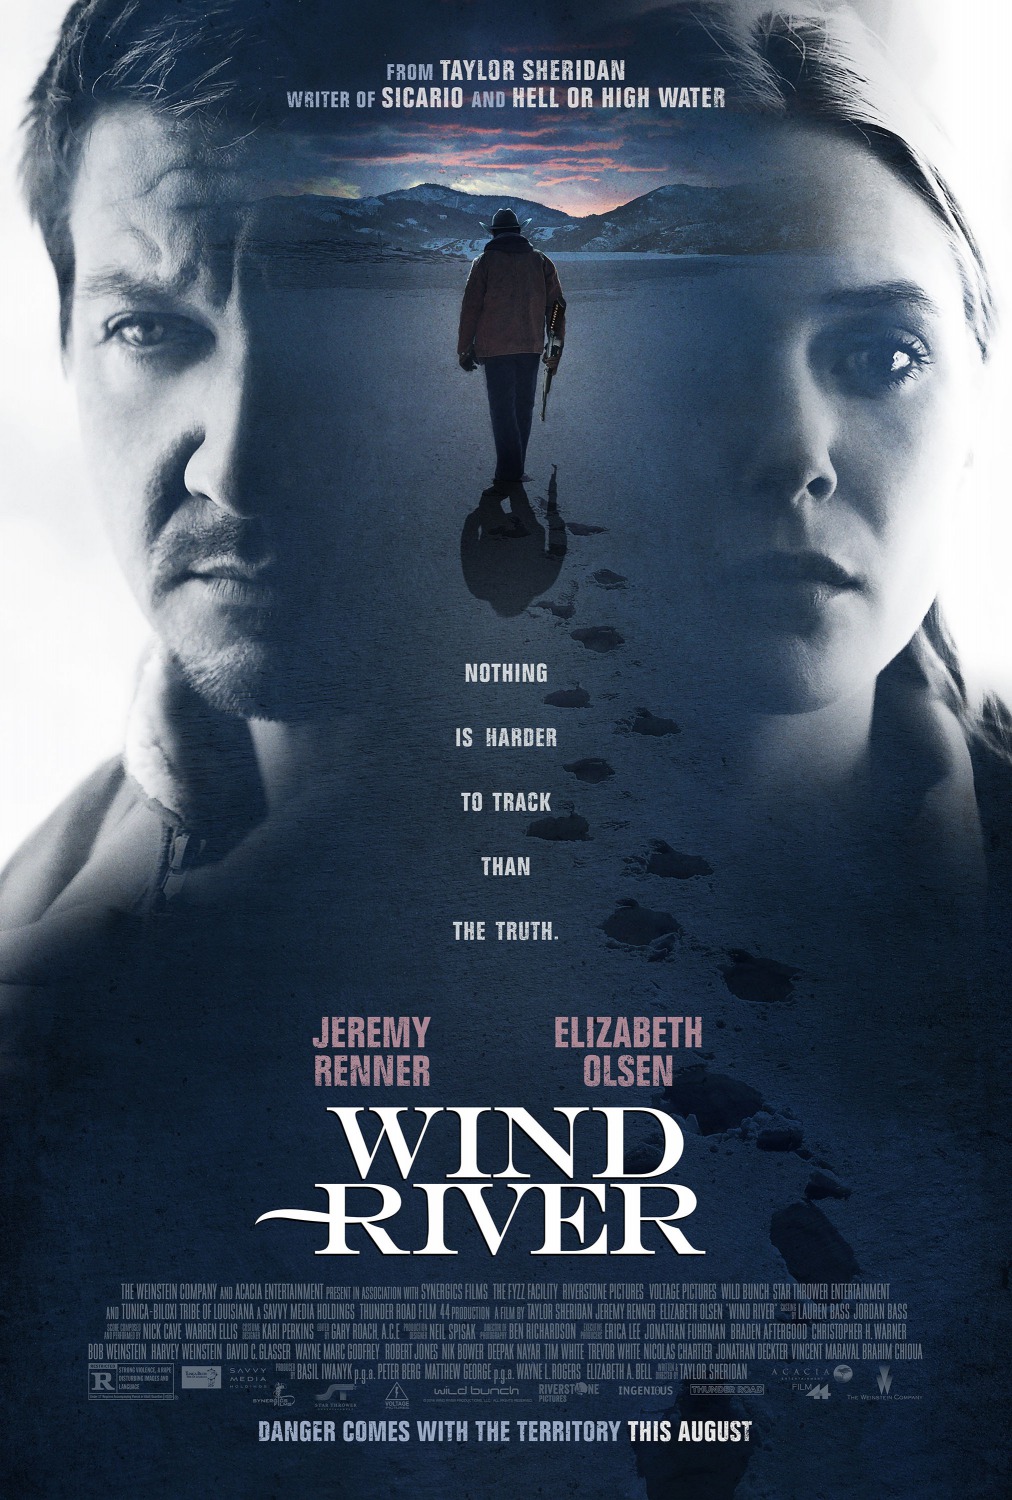 Movie posted for Wind River featuring Jeremy Renner and Elizabeth Olsen in the snow